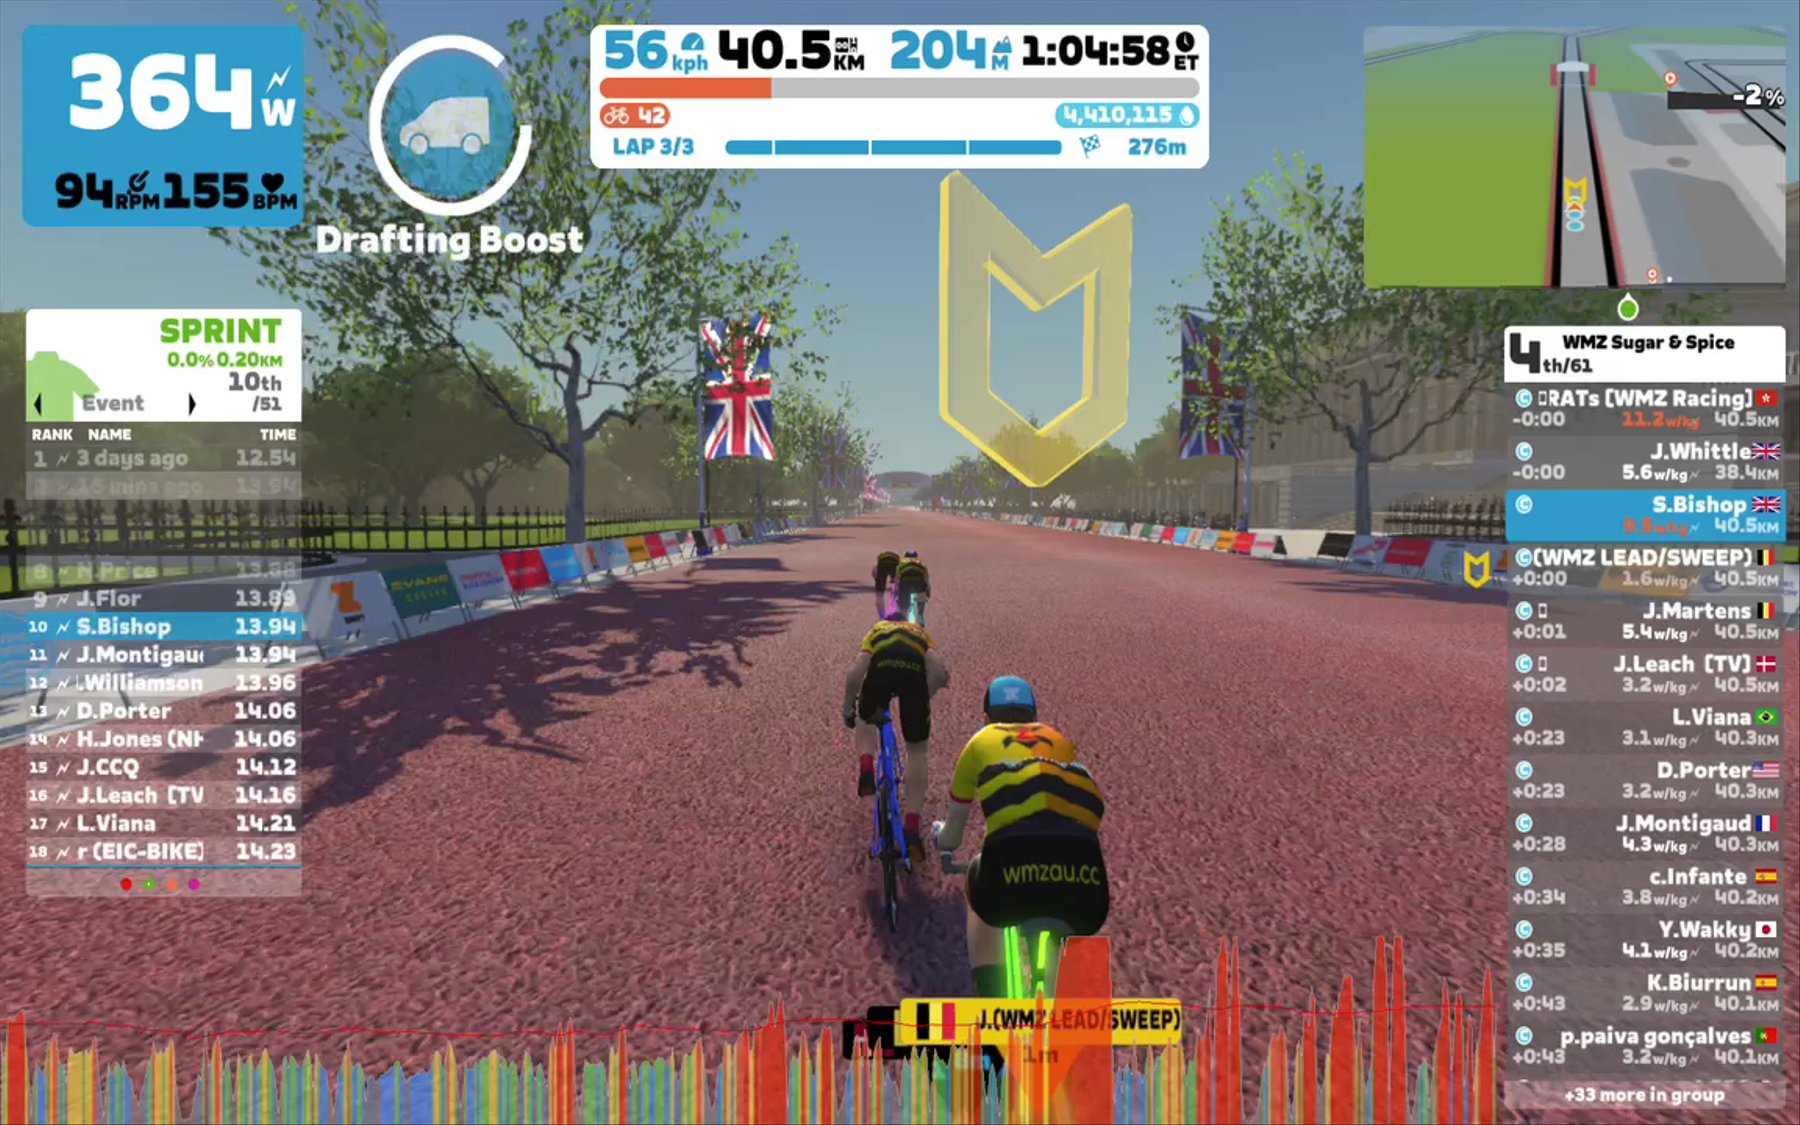 Zwift - Group Ride: WMZ Sugar & Spice (C) on Greater London Flat in London